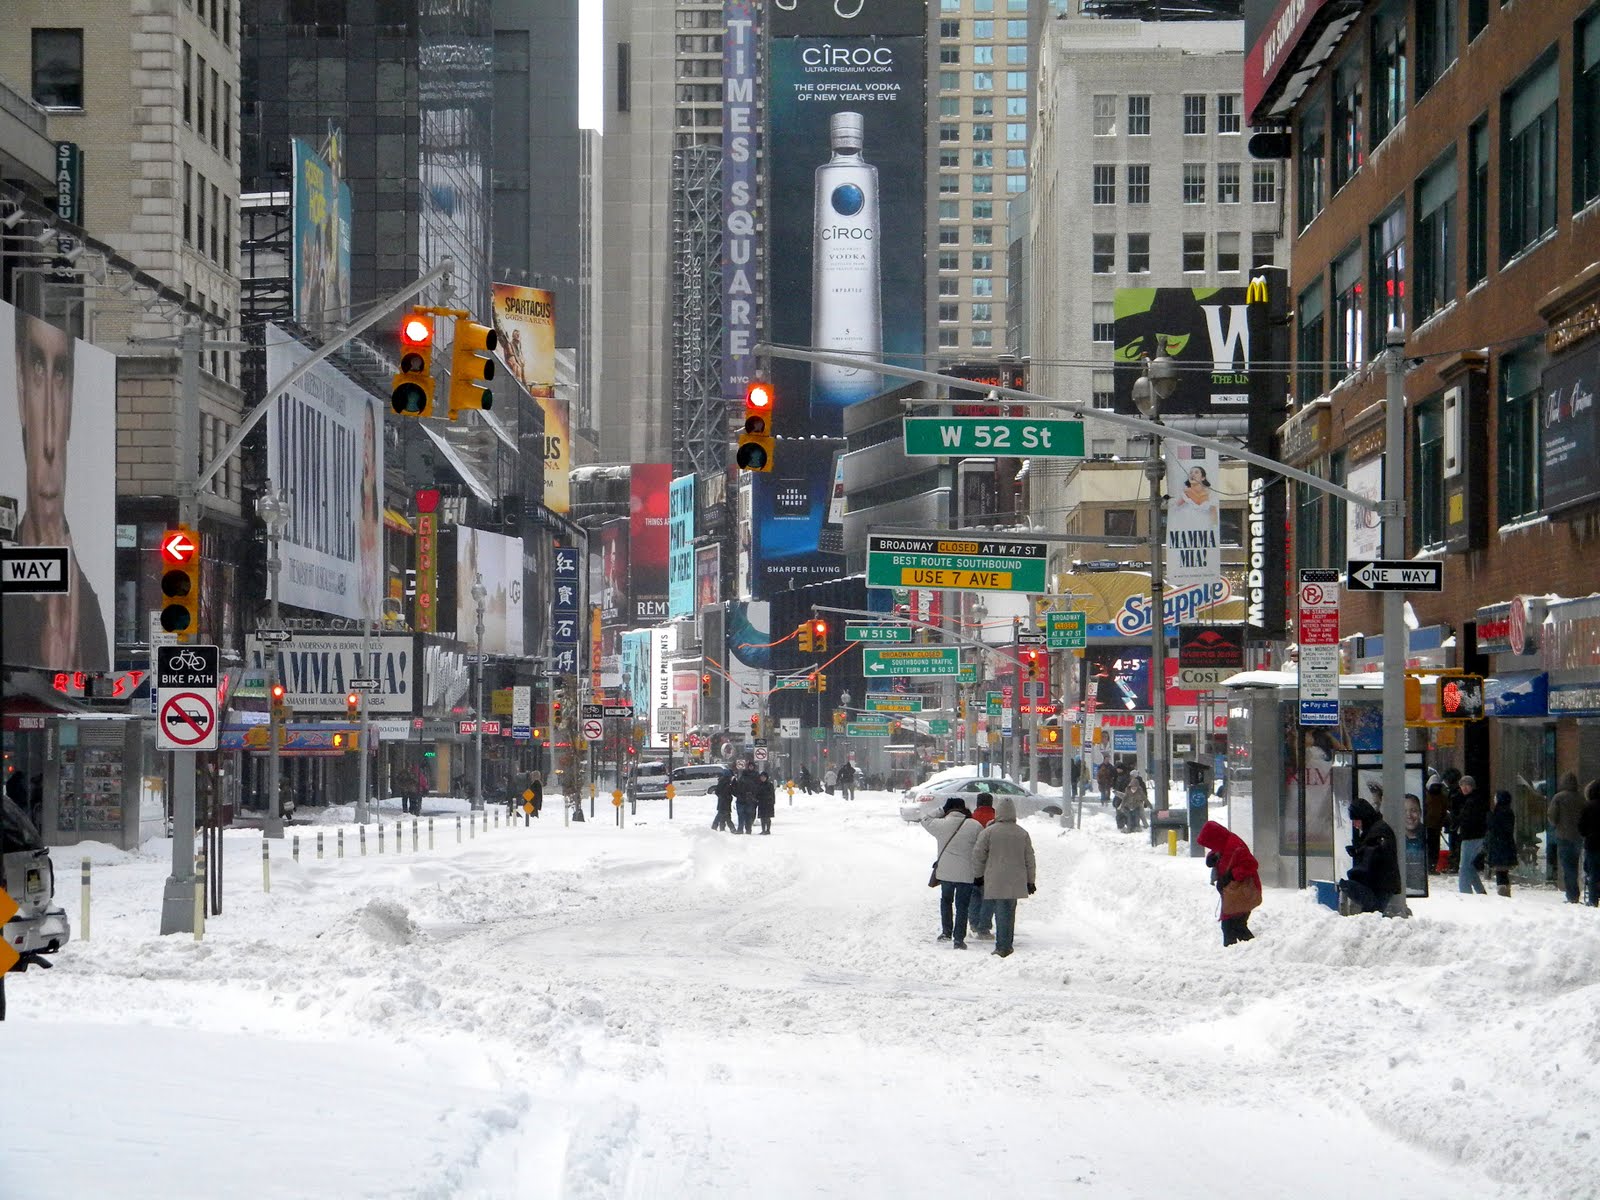 Public Domain Clip Art Photo And Image: Winter Snow Storm New York City 12 26 10 Times Square